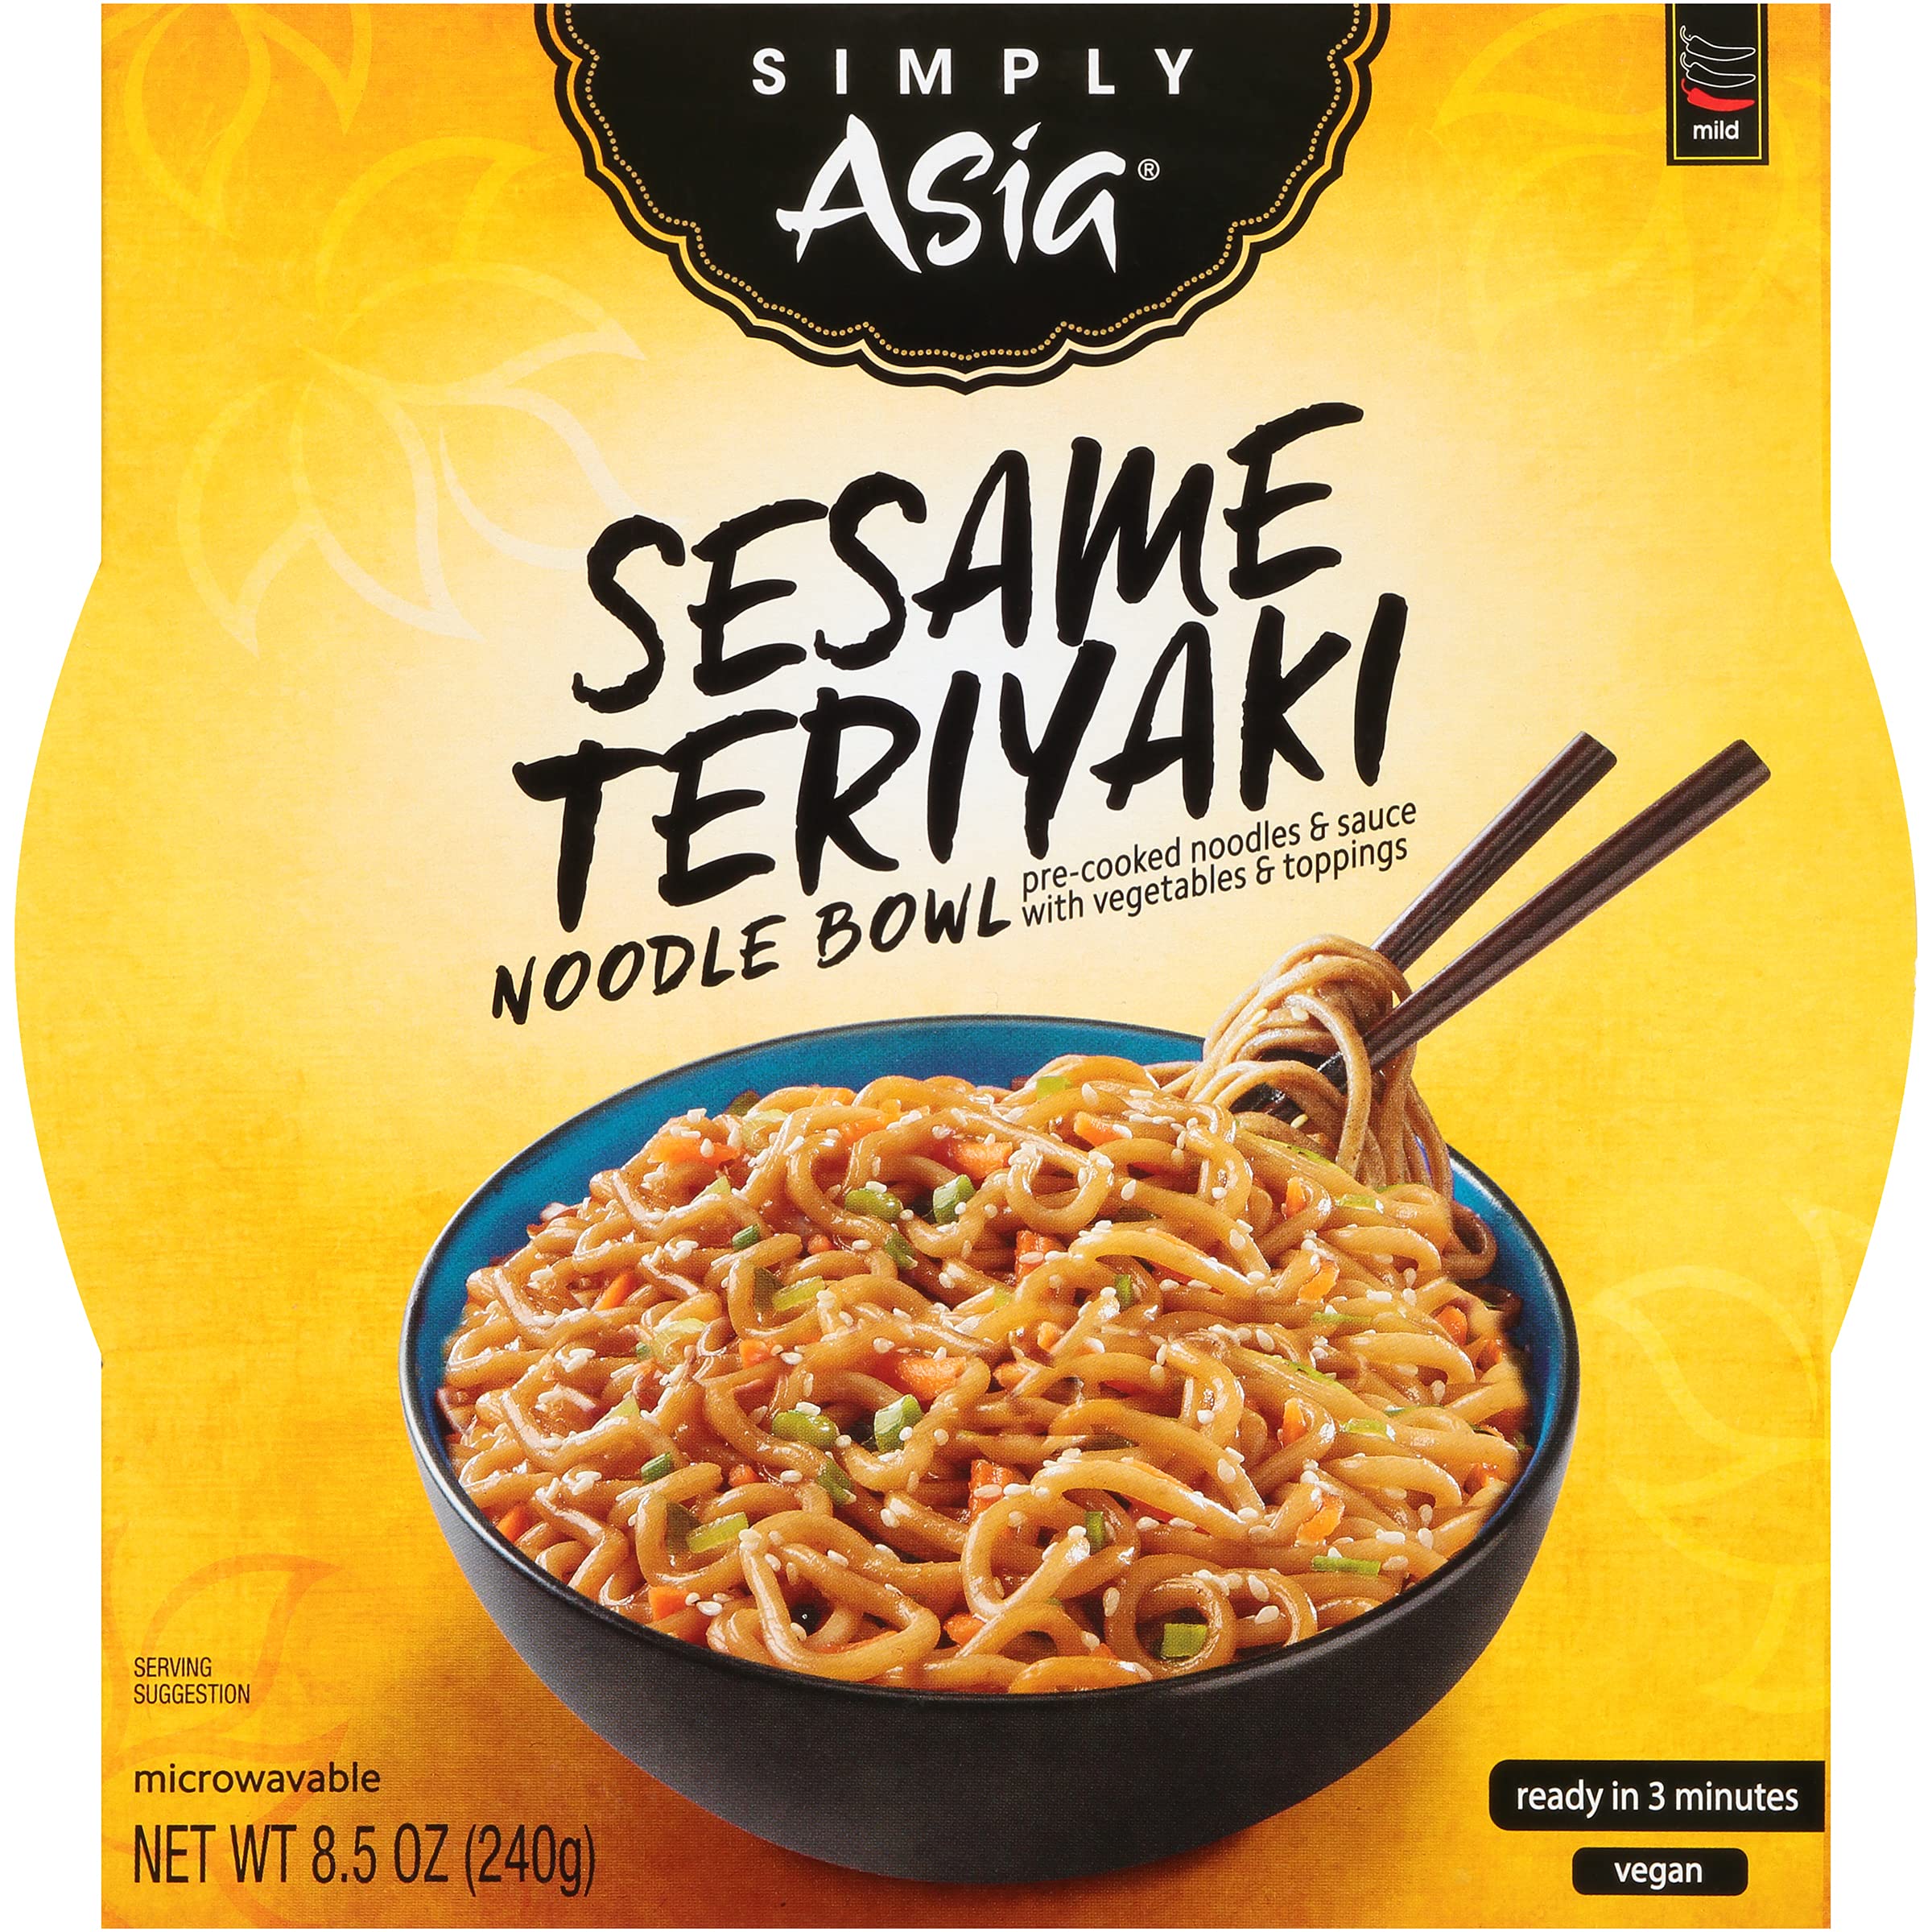 6 count 8.5oz Simply Asia Sesame Teriyaki Noodle Bowl with Toasted Sesame Seeds: $3.21 or lower at Amazon